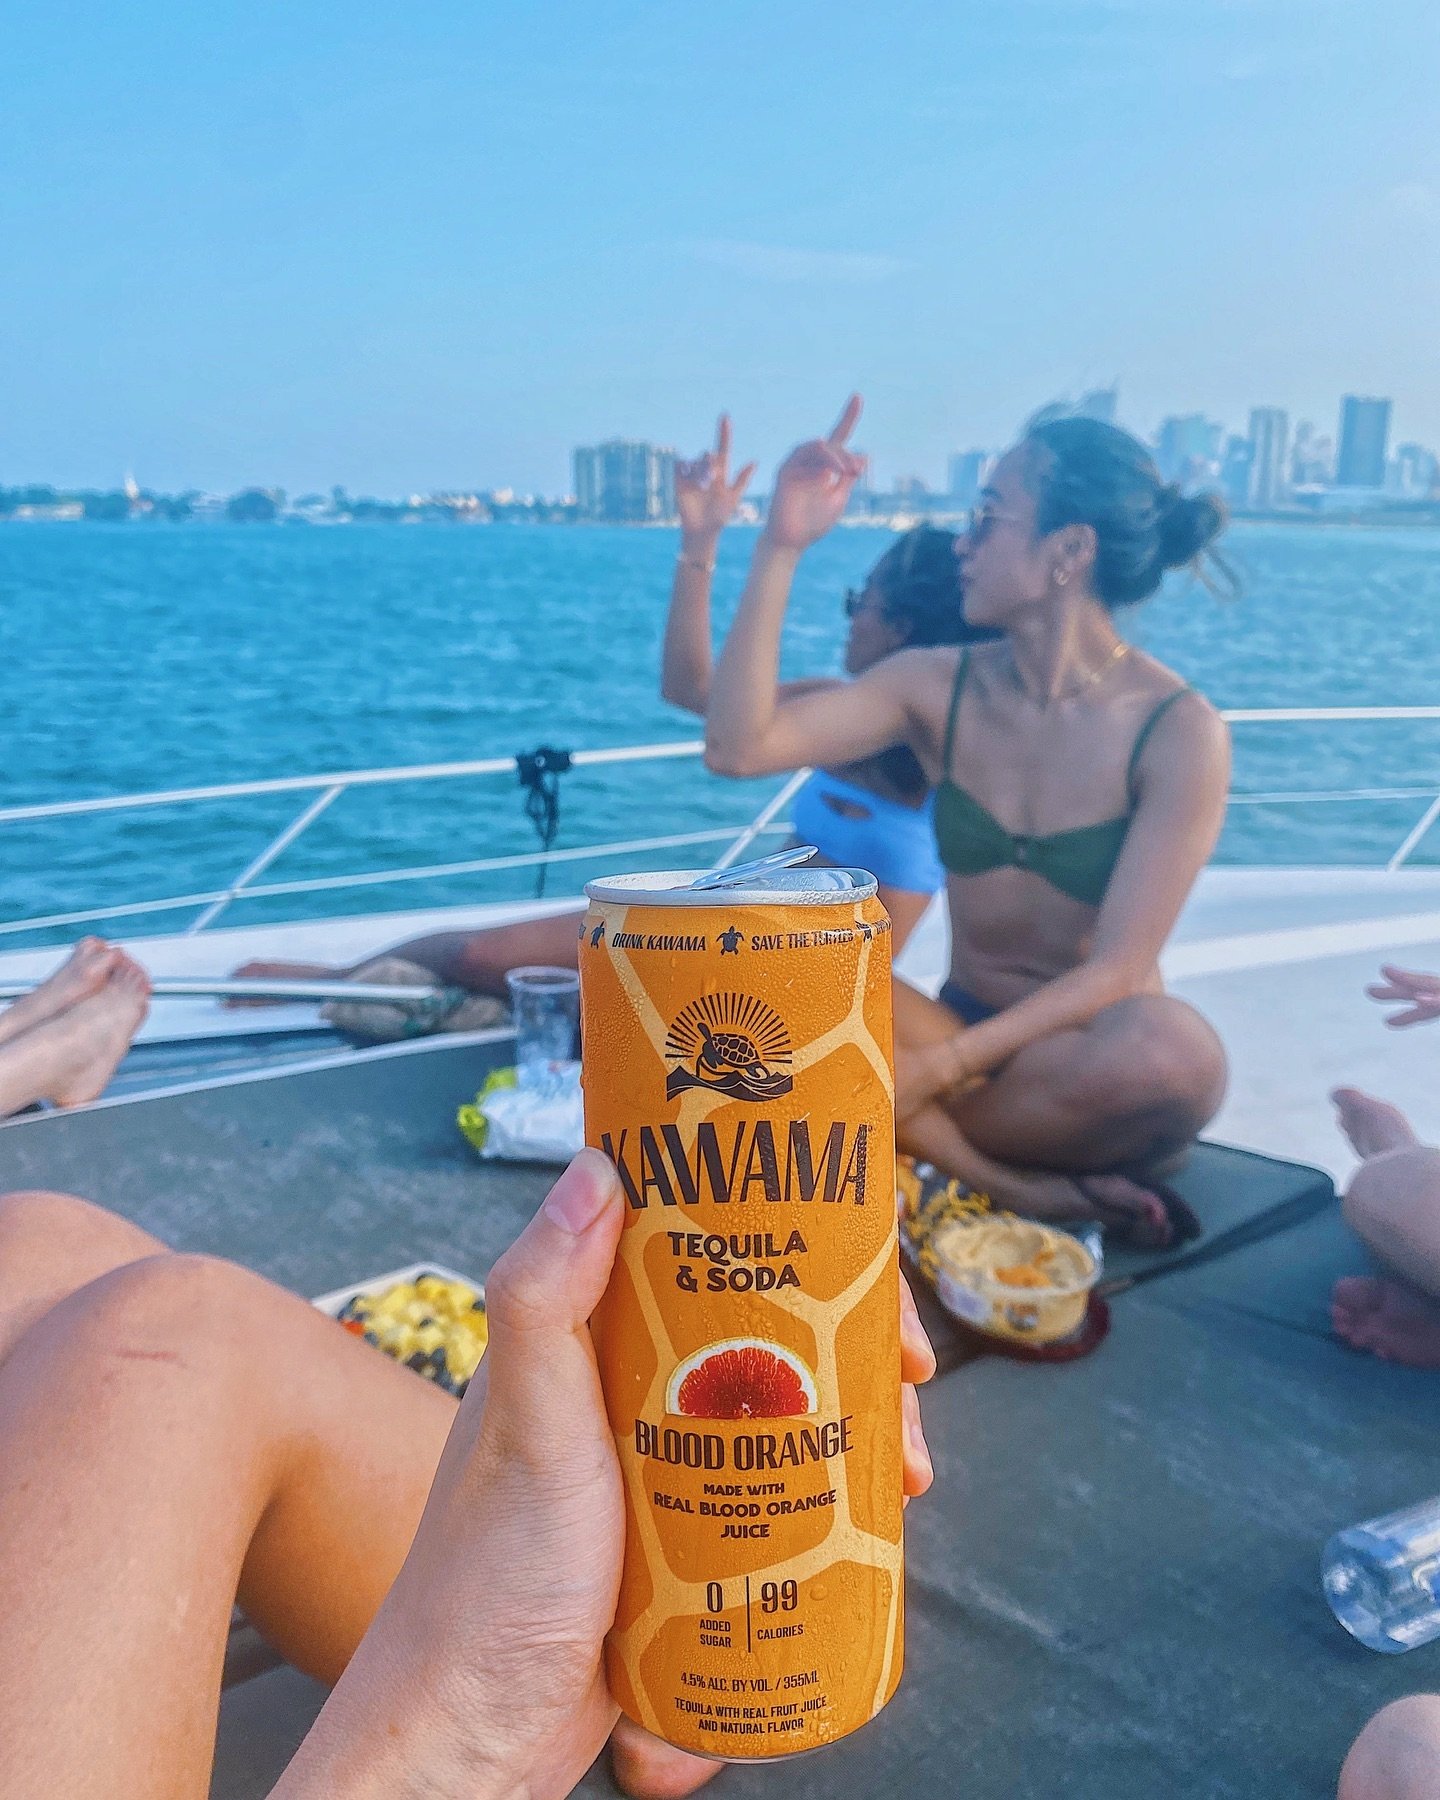 🛥️🍊☀️ ocean breeze with a chance of Kawama ☝🏻